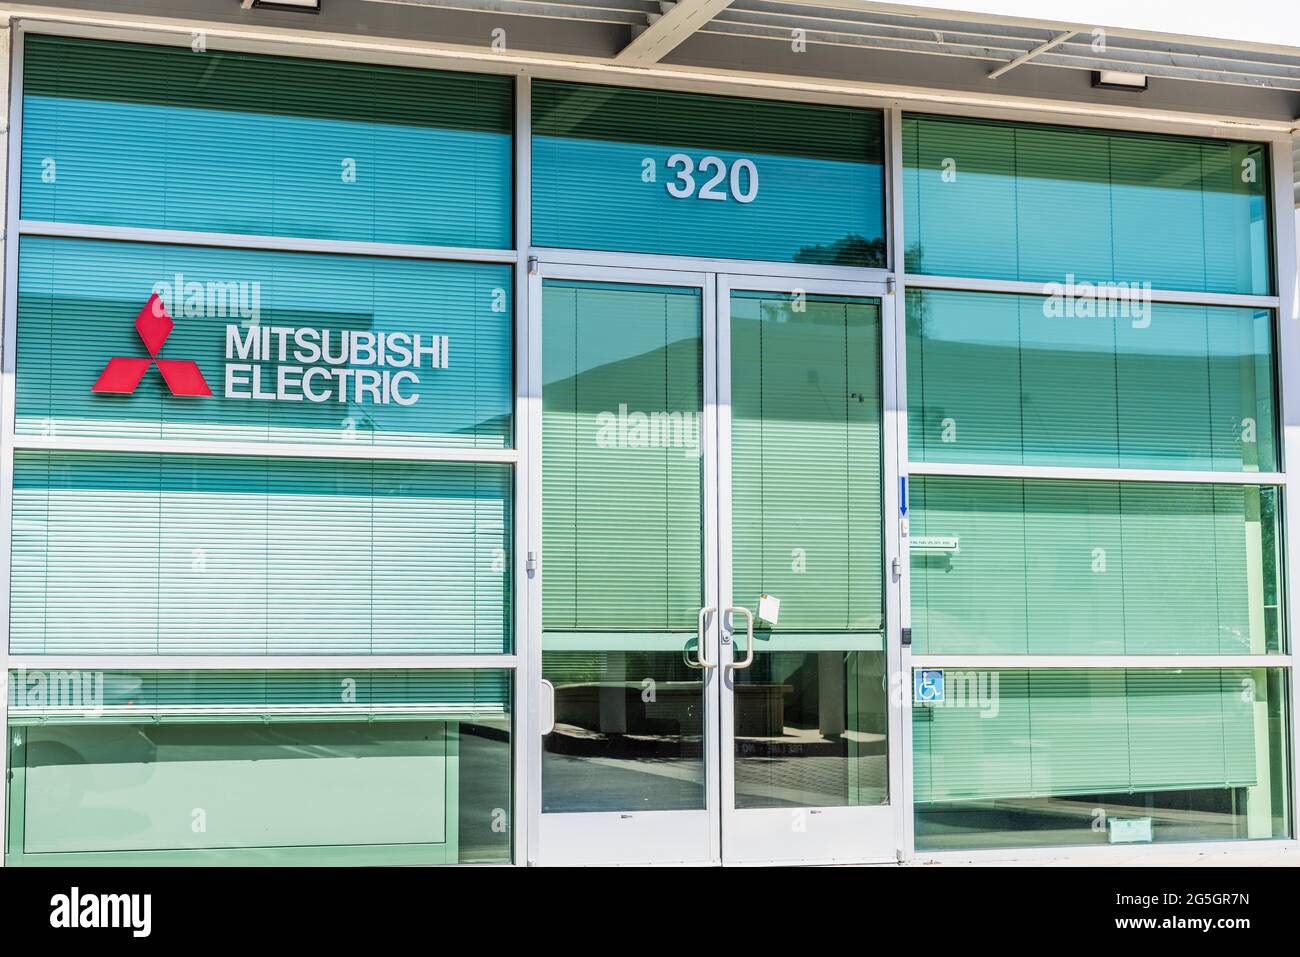 Sep 26, 2020 Mountain View / CA / USA - Mitsubishi Electric HQ in Silicon Valley; Mitsubishi Electric Corporation is a Japanese multinational electron Stock Photo